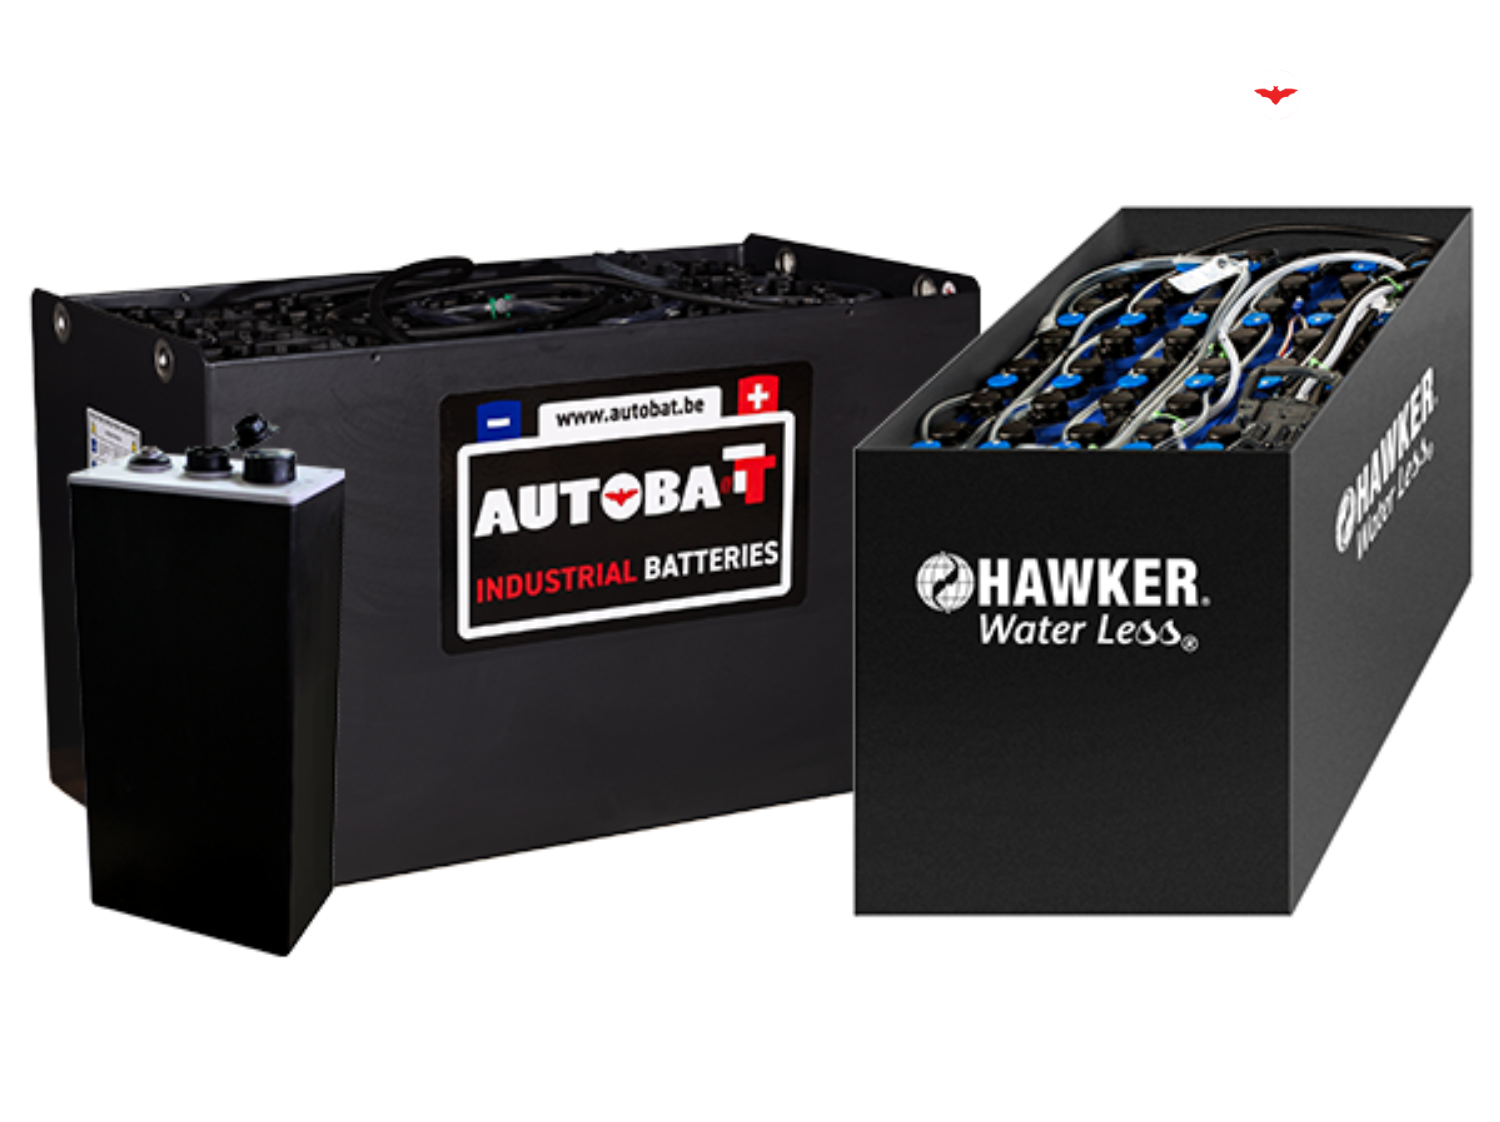 The 2V traction battery for industrial applications